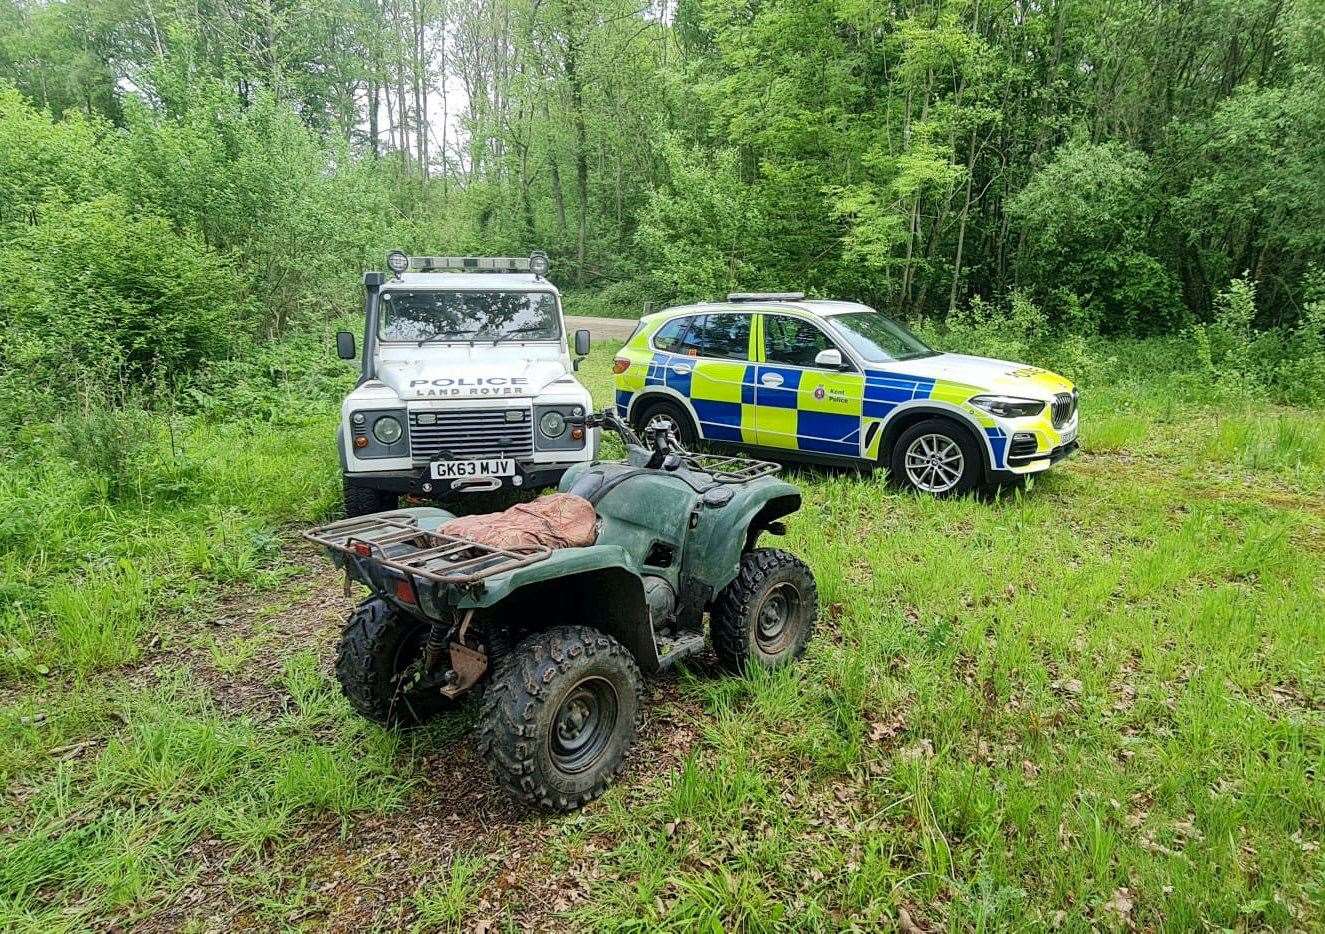 Police recovered a stolen quad bike deep in the woods in Biddenden, near Ashford. Picture: @KPTacOps